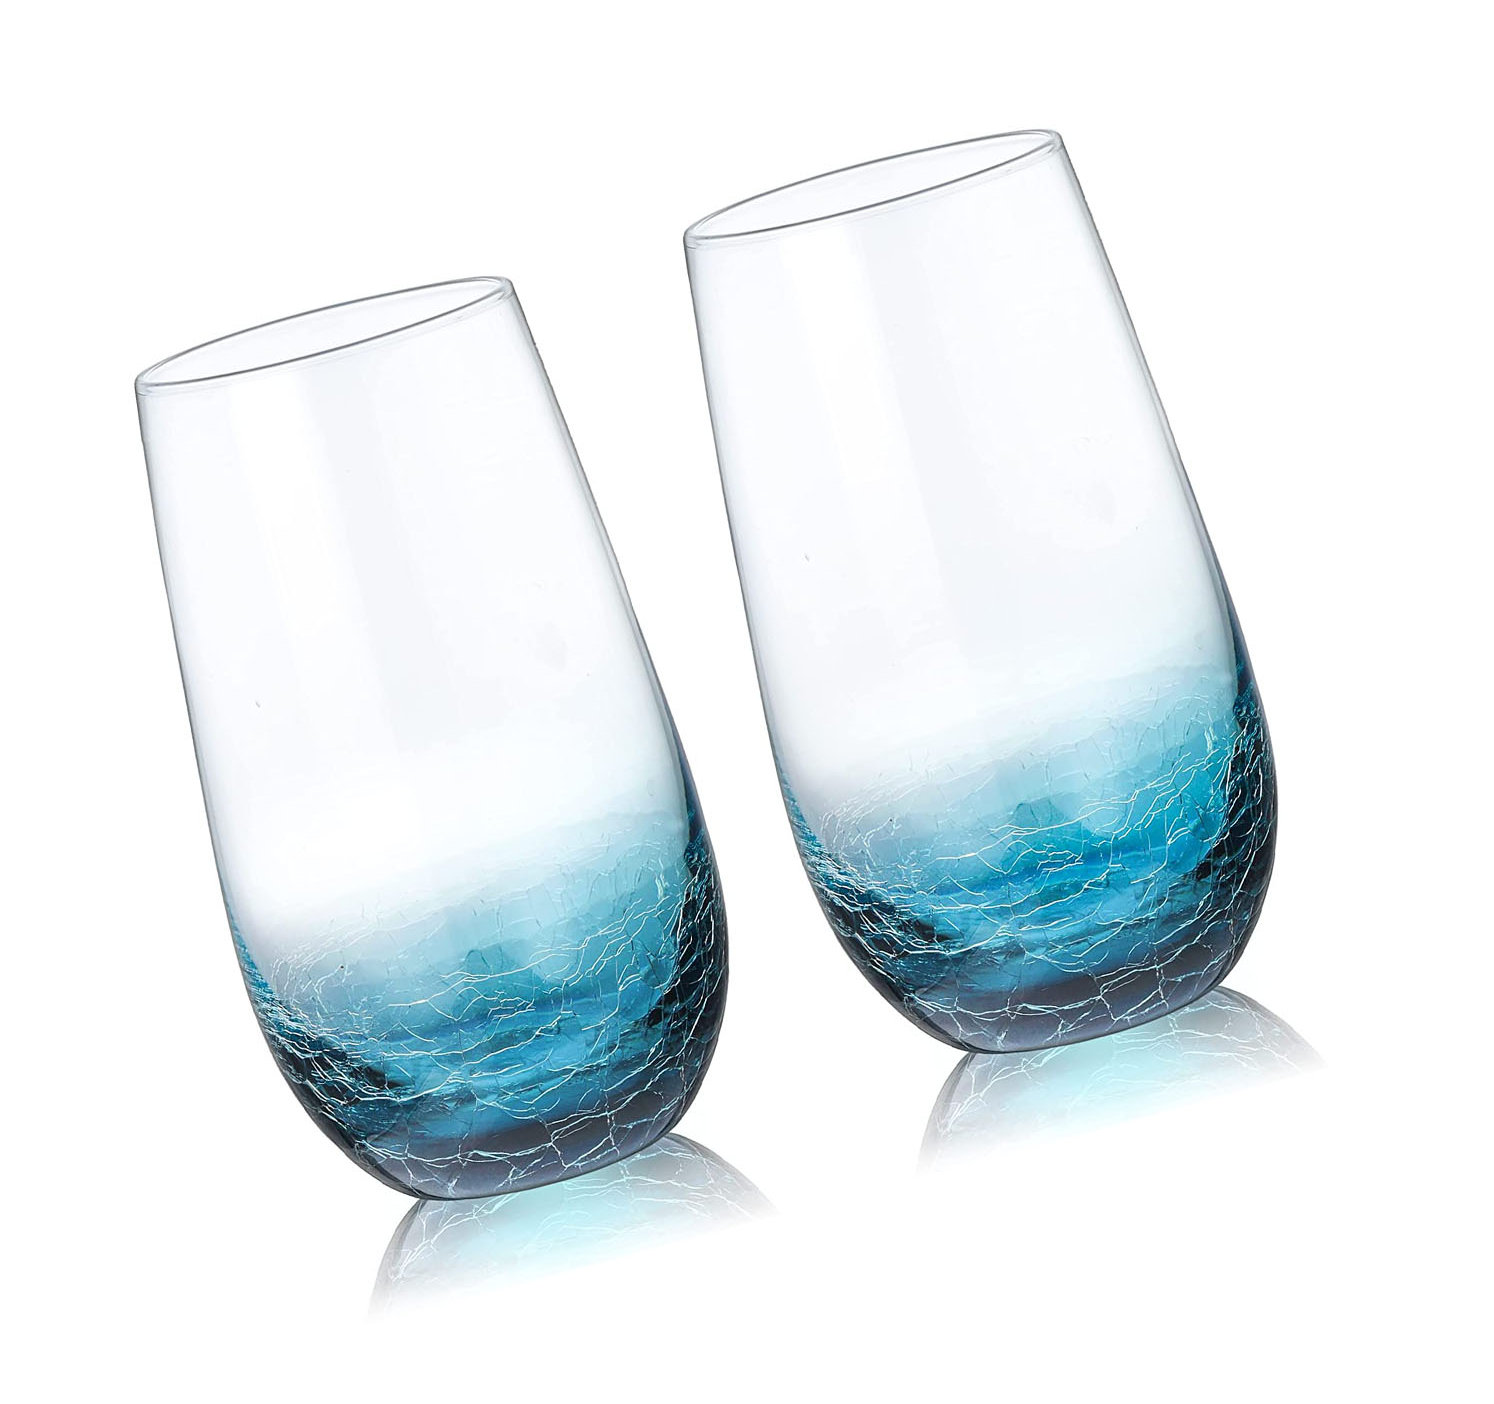 Joeyan Handmade Blue Stemless Crackle Wine Glasses Cups,Large  Crystal Red Wine Tumblers,Aesthetics Glassware Collection, Home Gift,Set of  2,19 oz: Wine Glasses